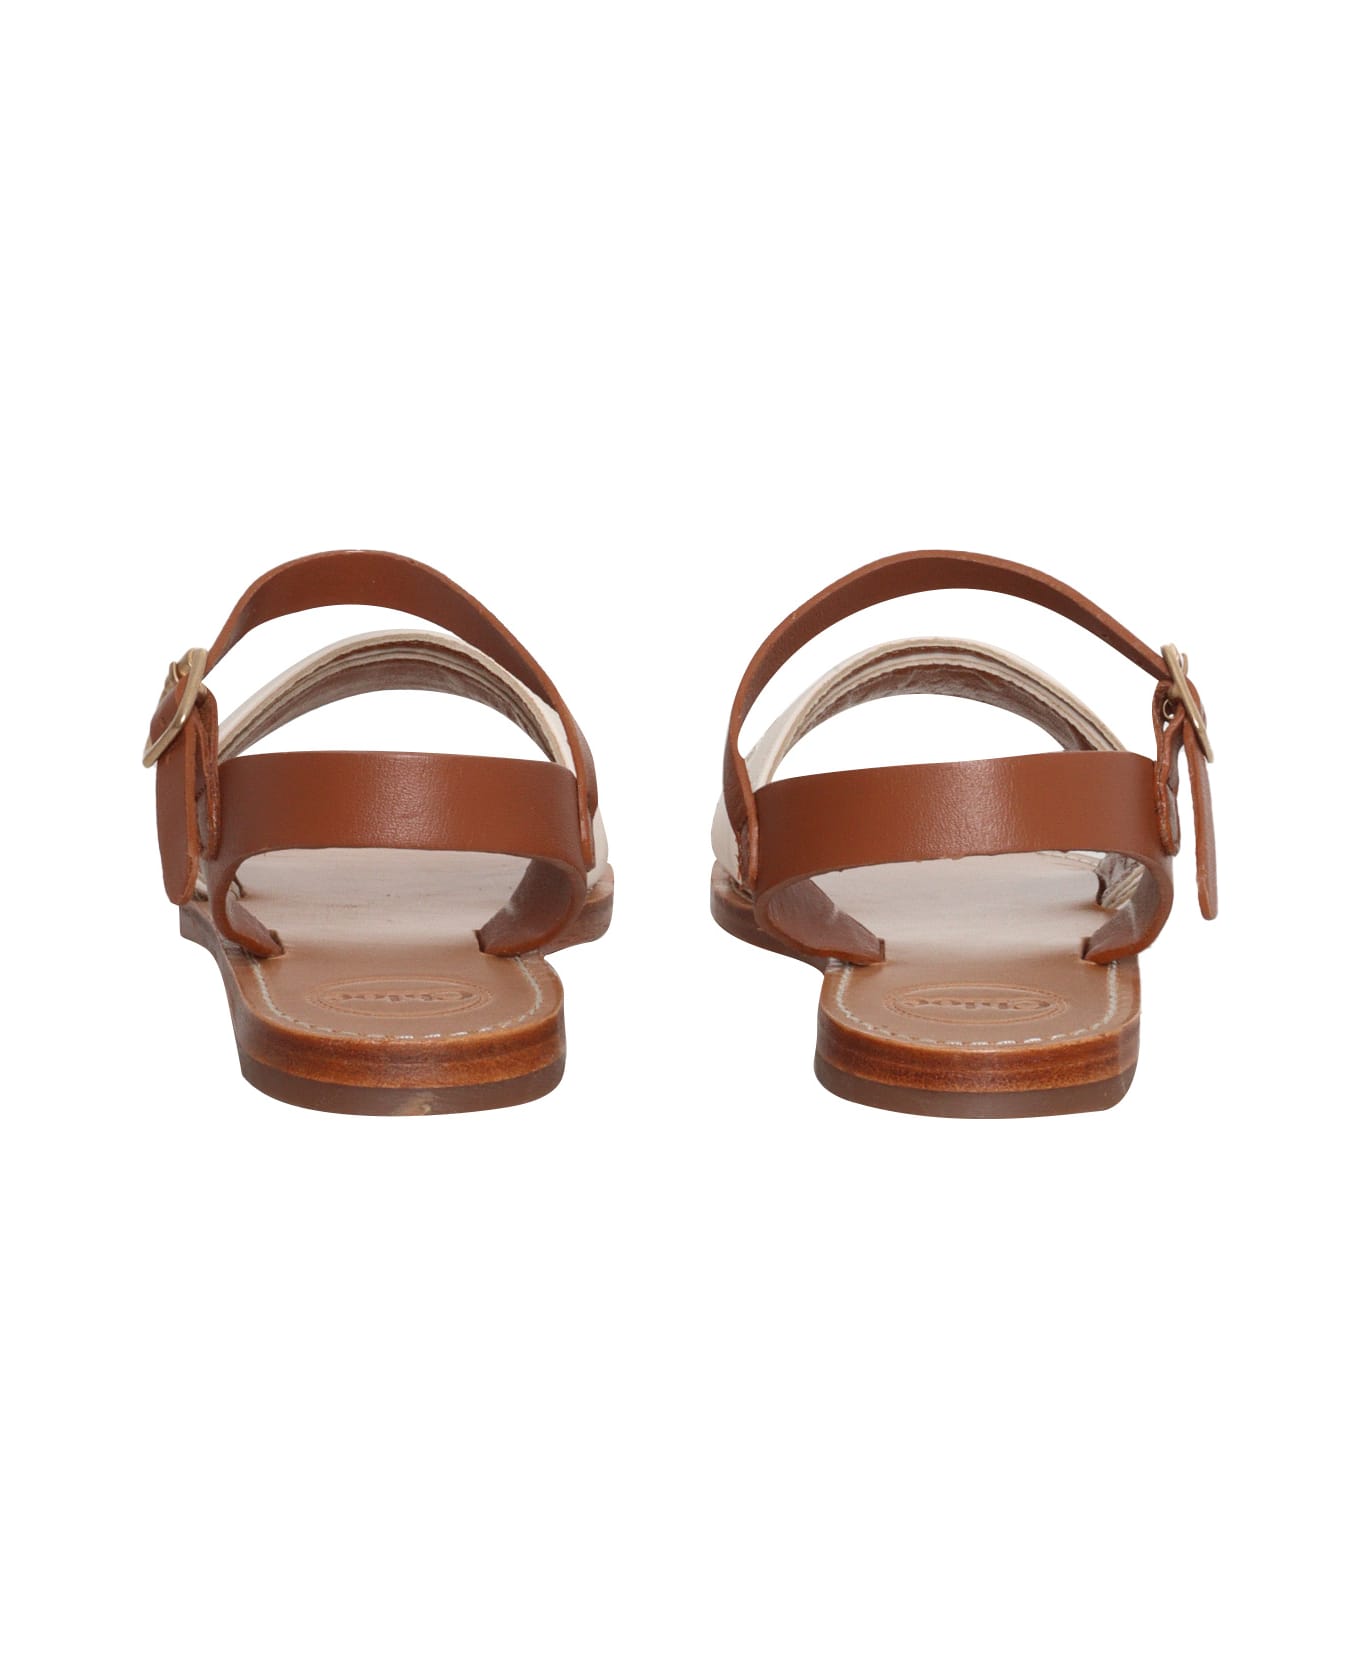 Chloé Leather Sandals With Logo - WHITE